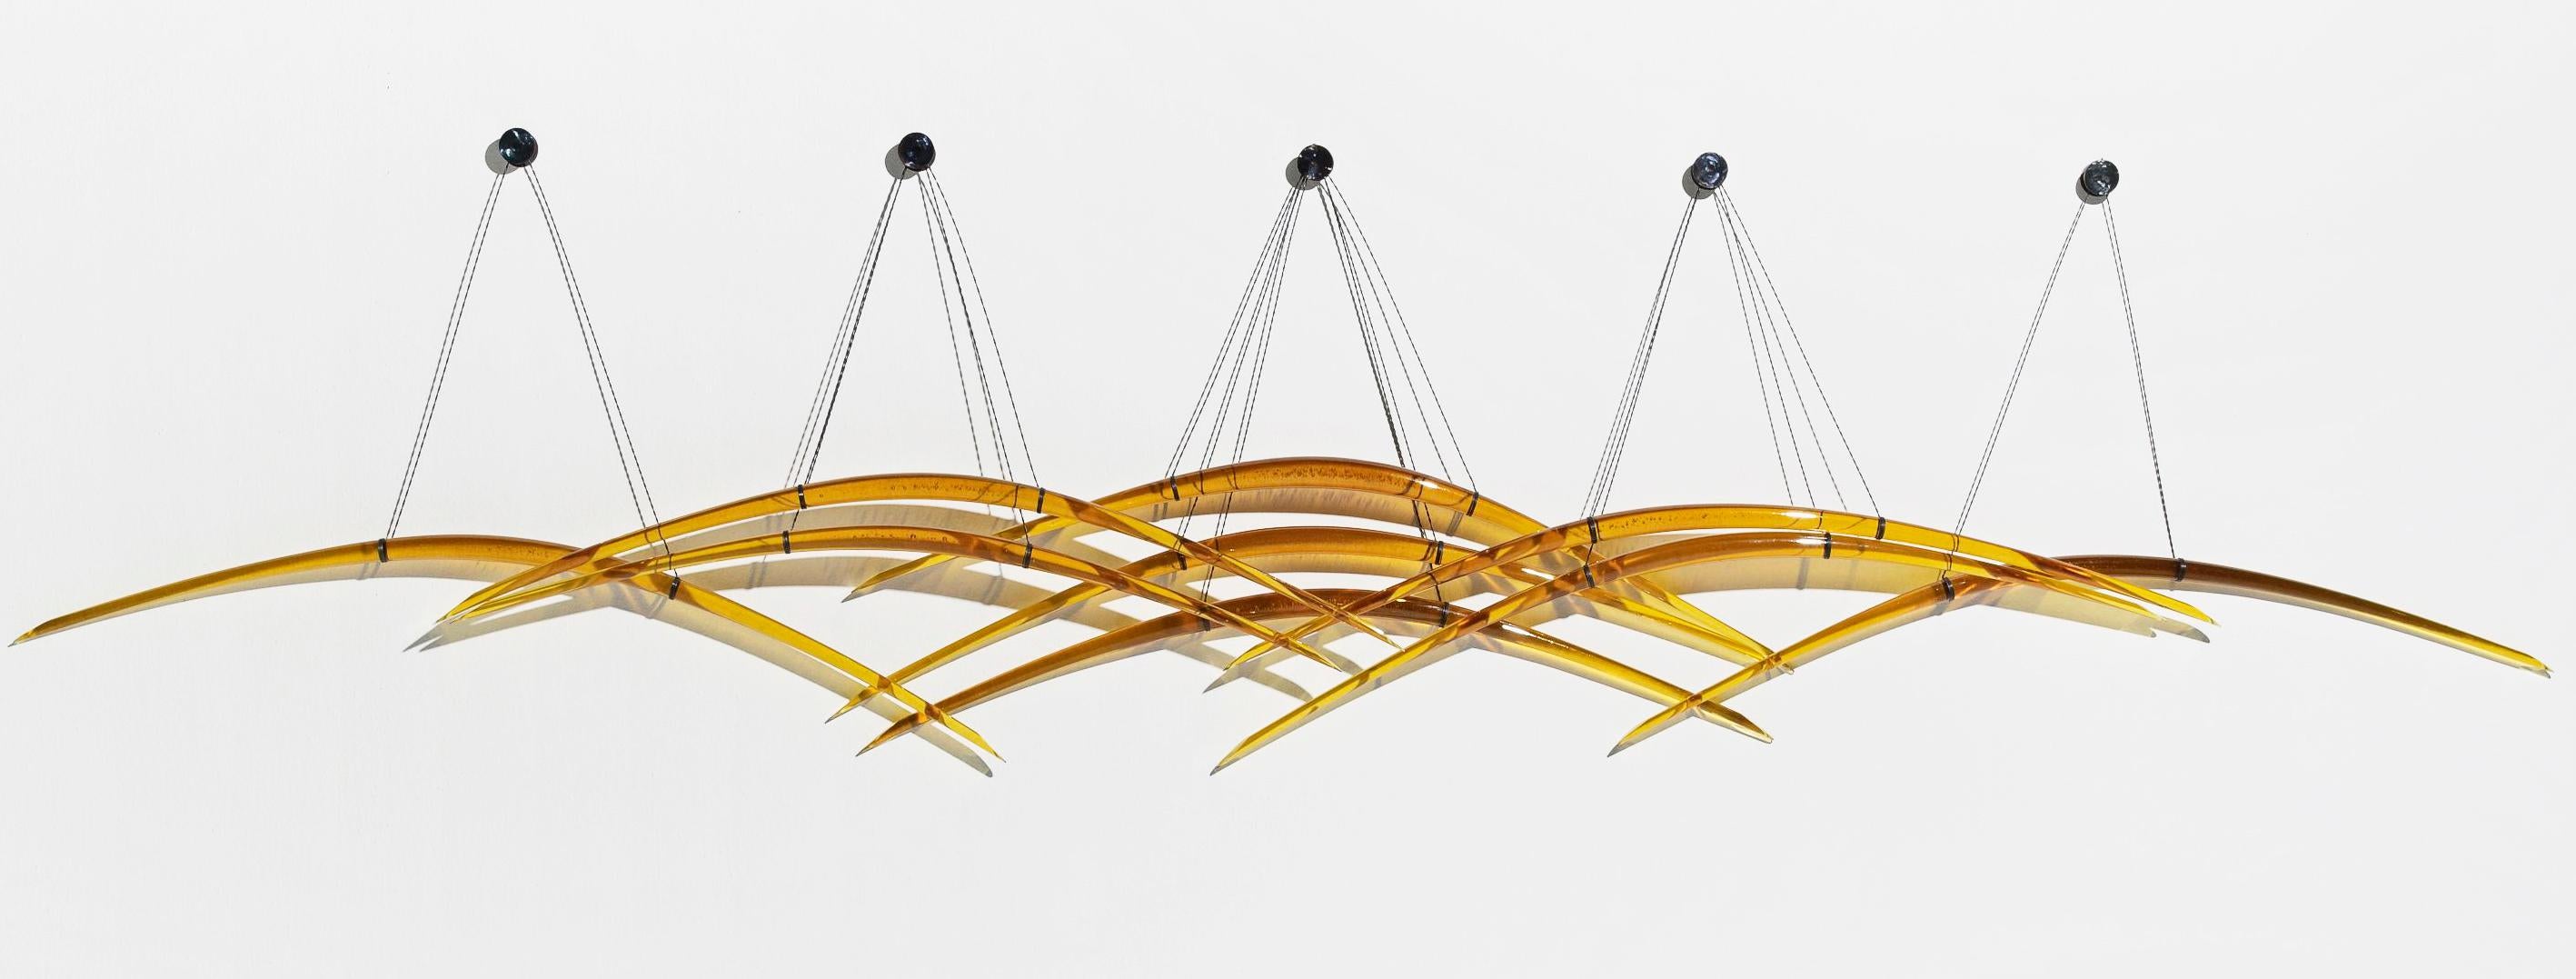 Probability - large, glass, translucent, amber yellow, suspended, wall sculpture - Sculpture by John Paul Robinson